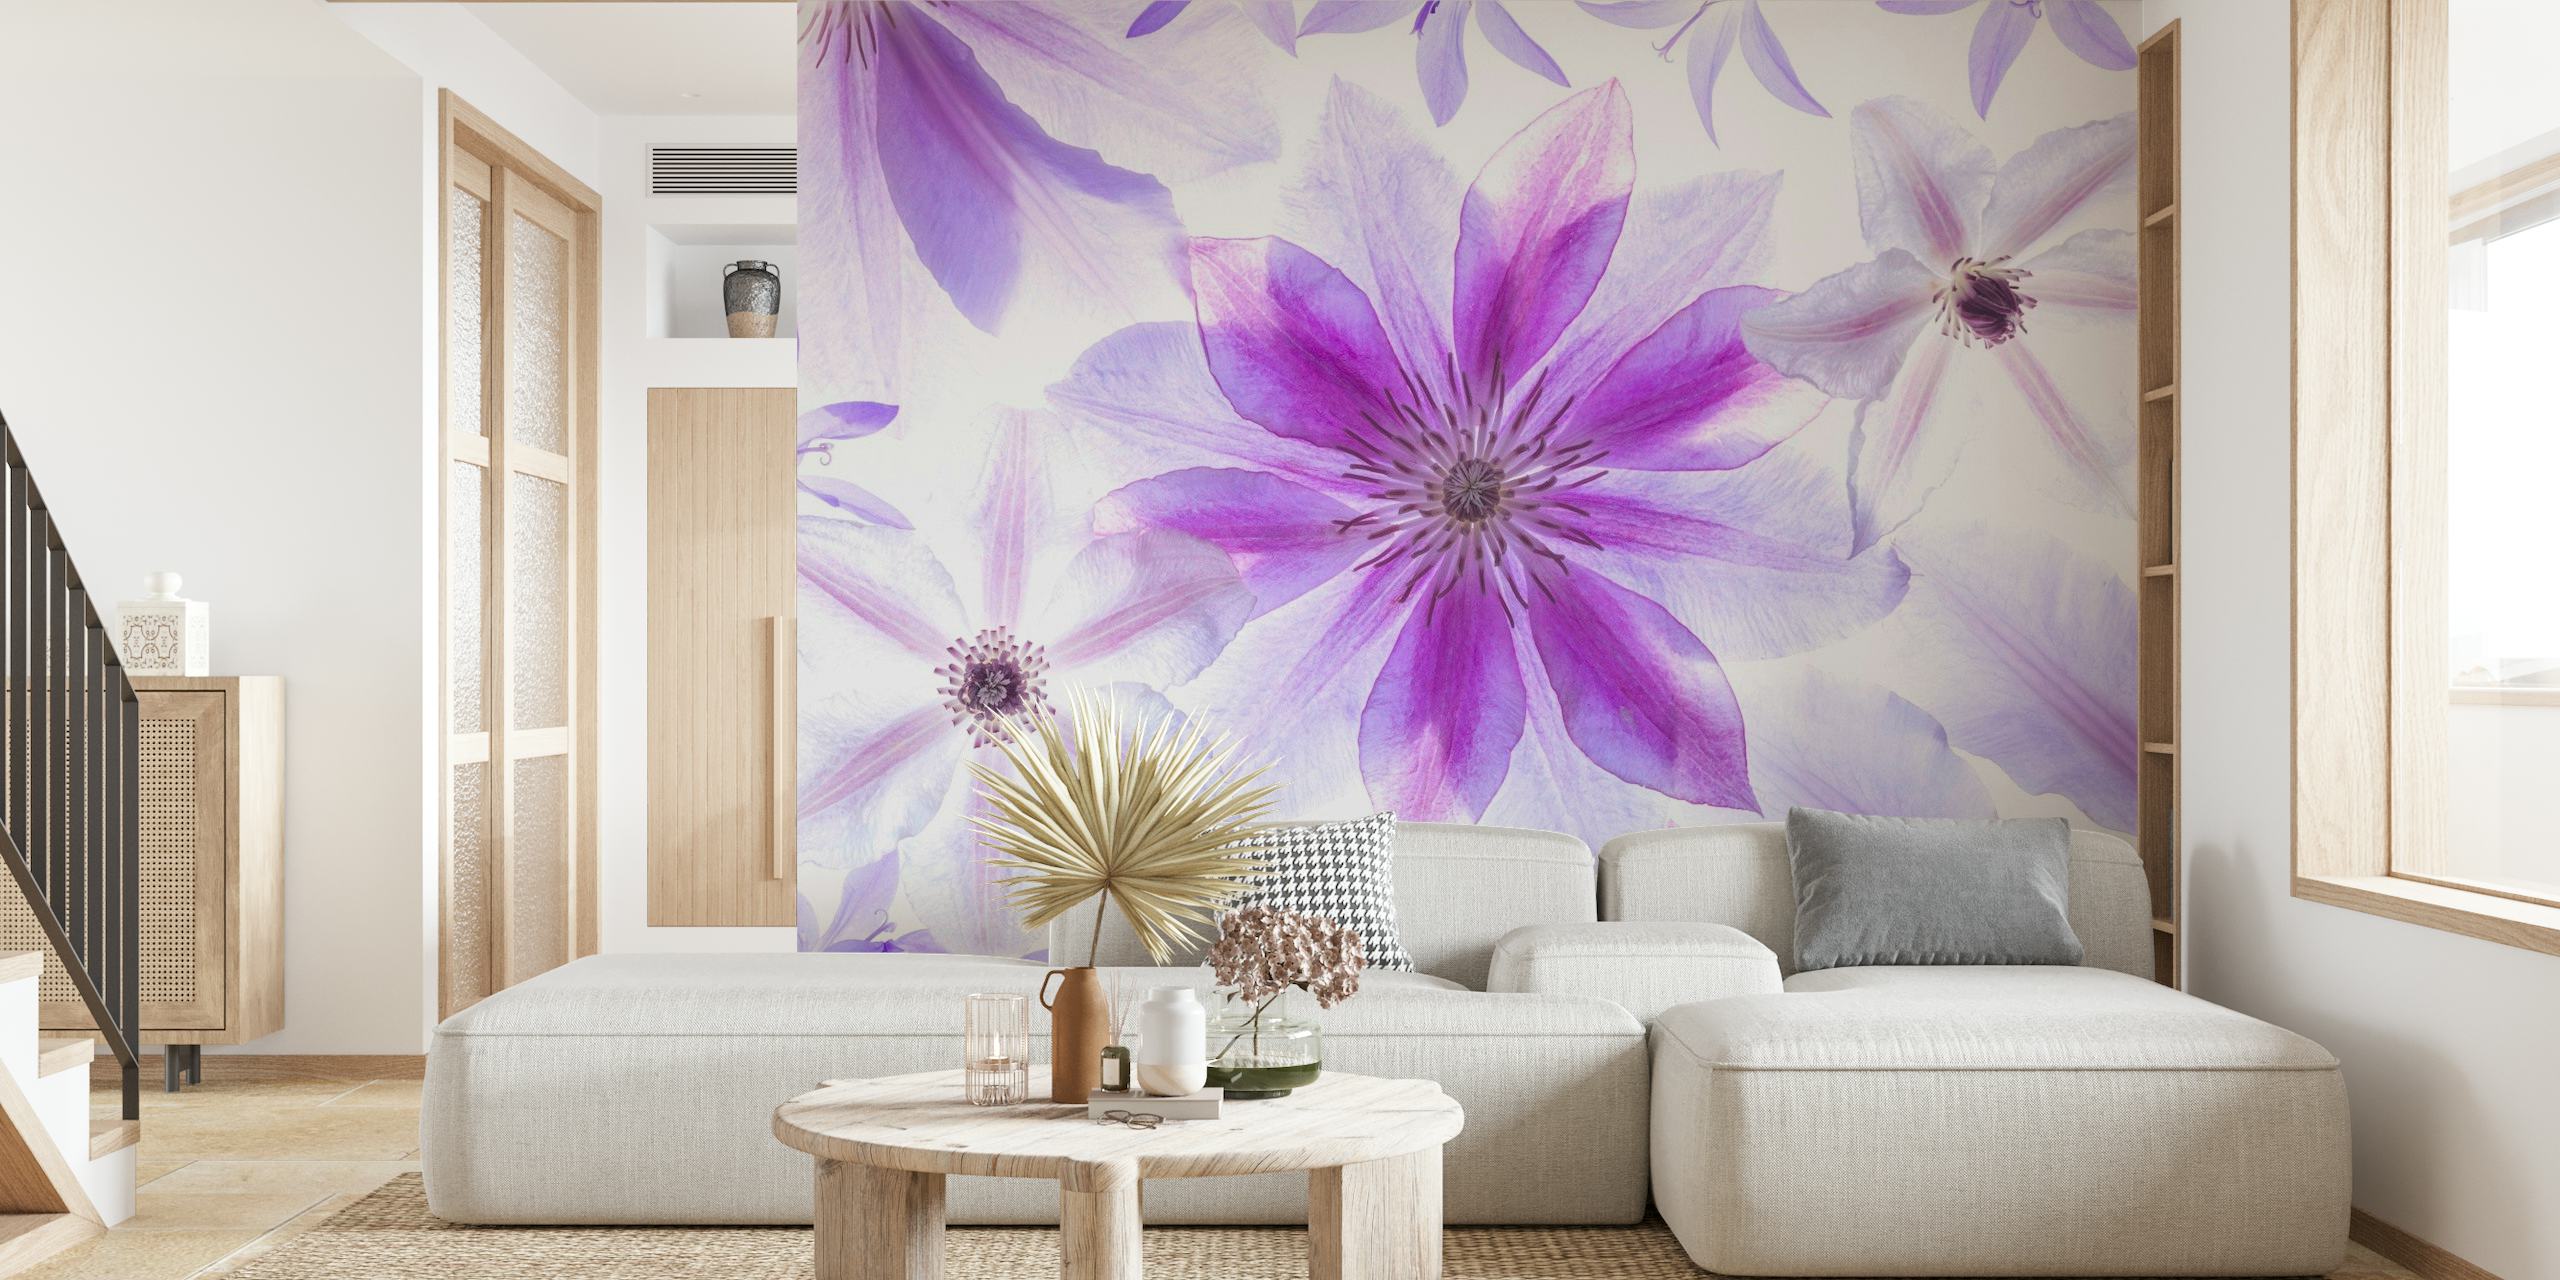 Purple and white clematis flowers wall mural for home decor